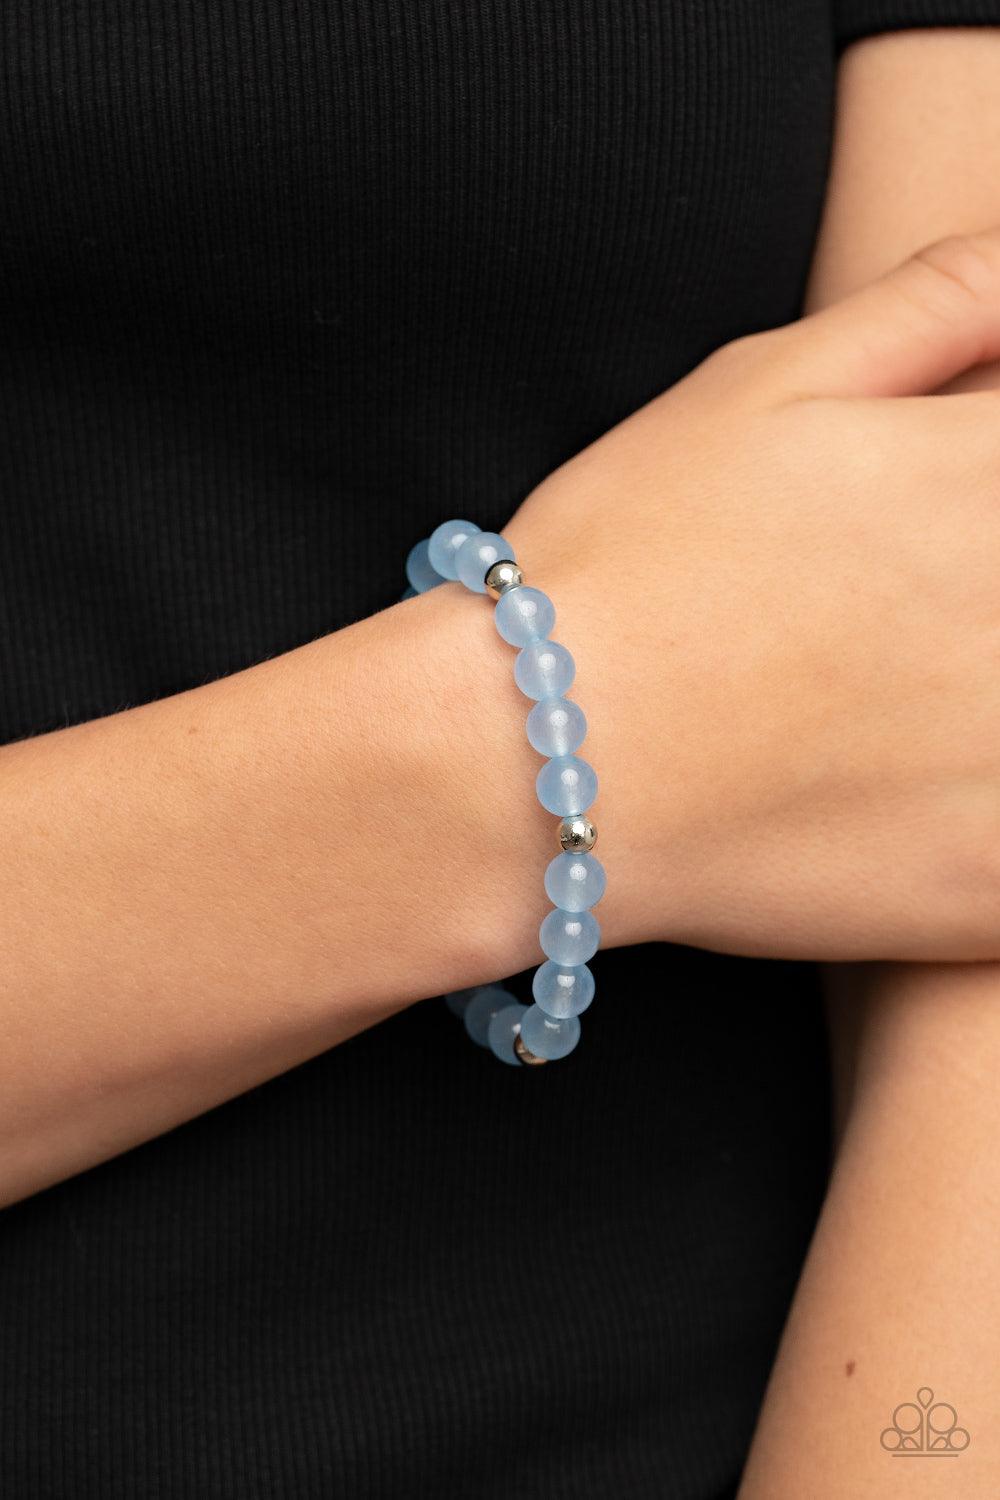 Forever and a DAYDREAM Blue Bracelet - Jewelry by Bretta